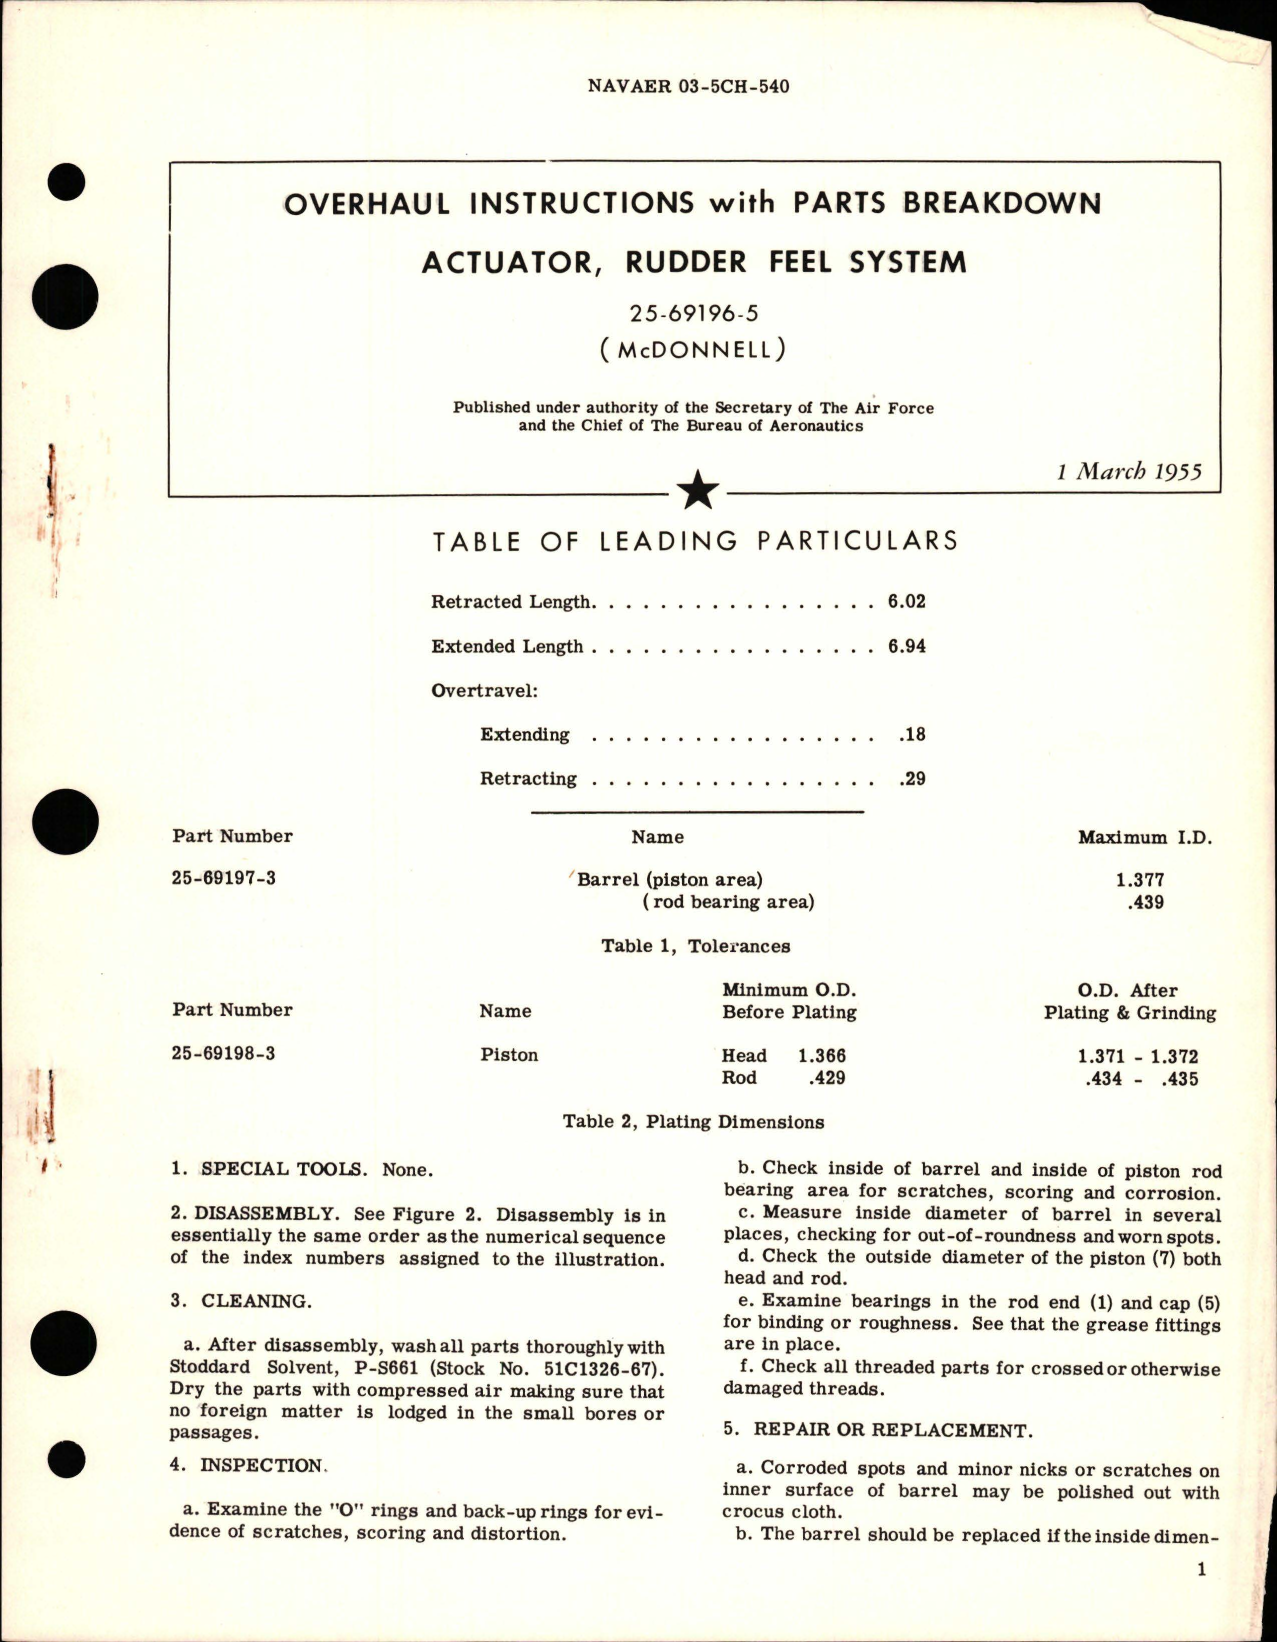 Sample page 1 from AirCorps Library document: Overhaul Instructions w Parts Breakdown for Rudder Feel System Actuator - 25-69196-5